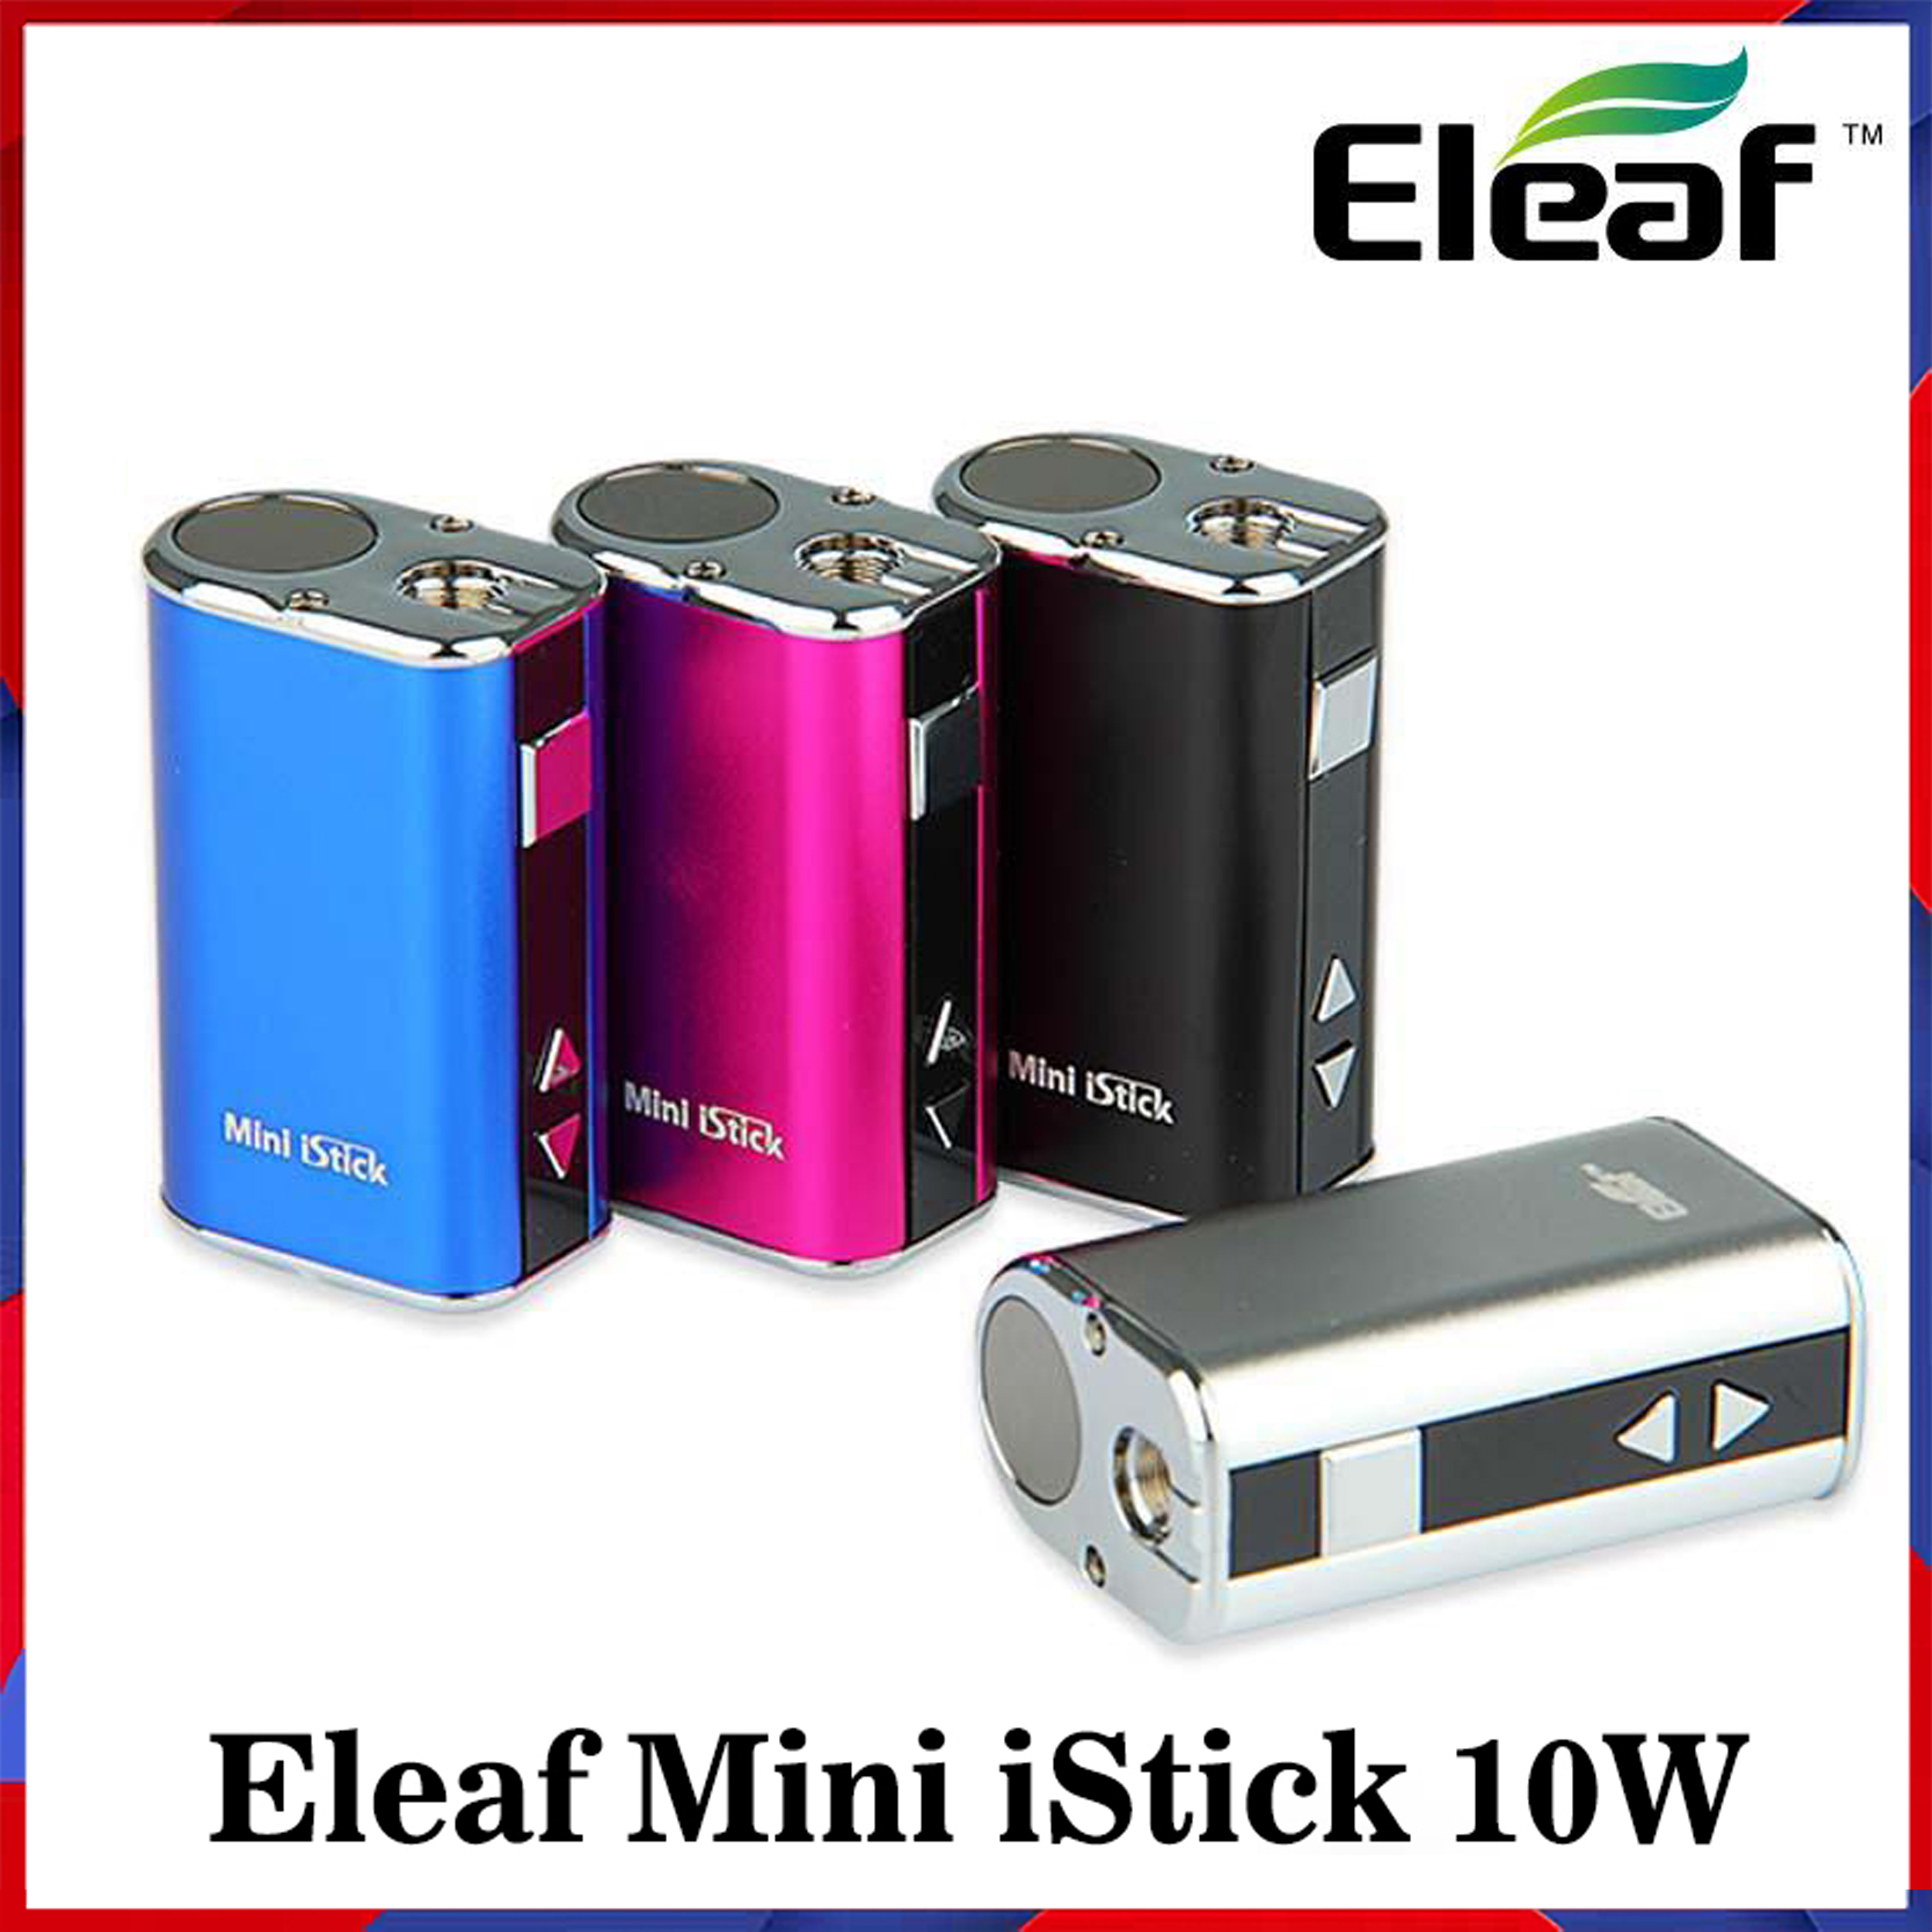 

Eleaf Mini iStick Kit 7 colors 1050mah Built-in Battery 10w Max Output Variable Voltage Mod with USB Cable eGo Connector Fast Ship In One Day, Mixed this 4 colors